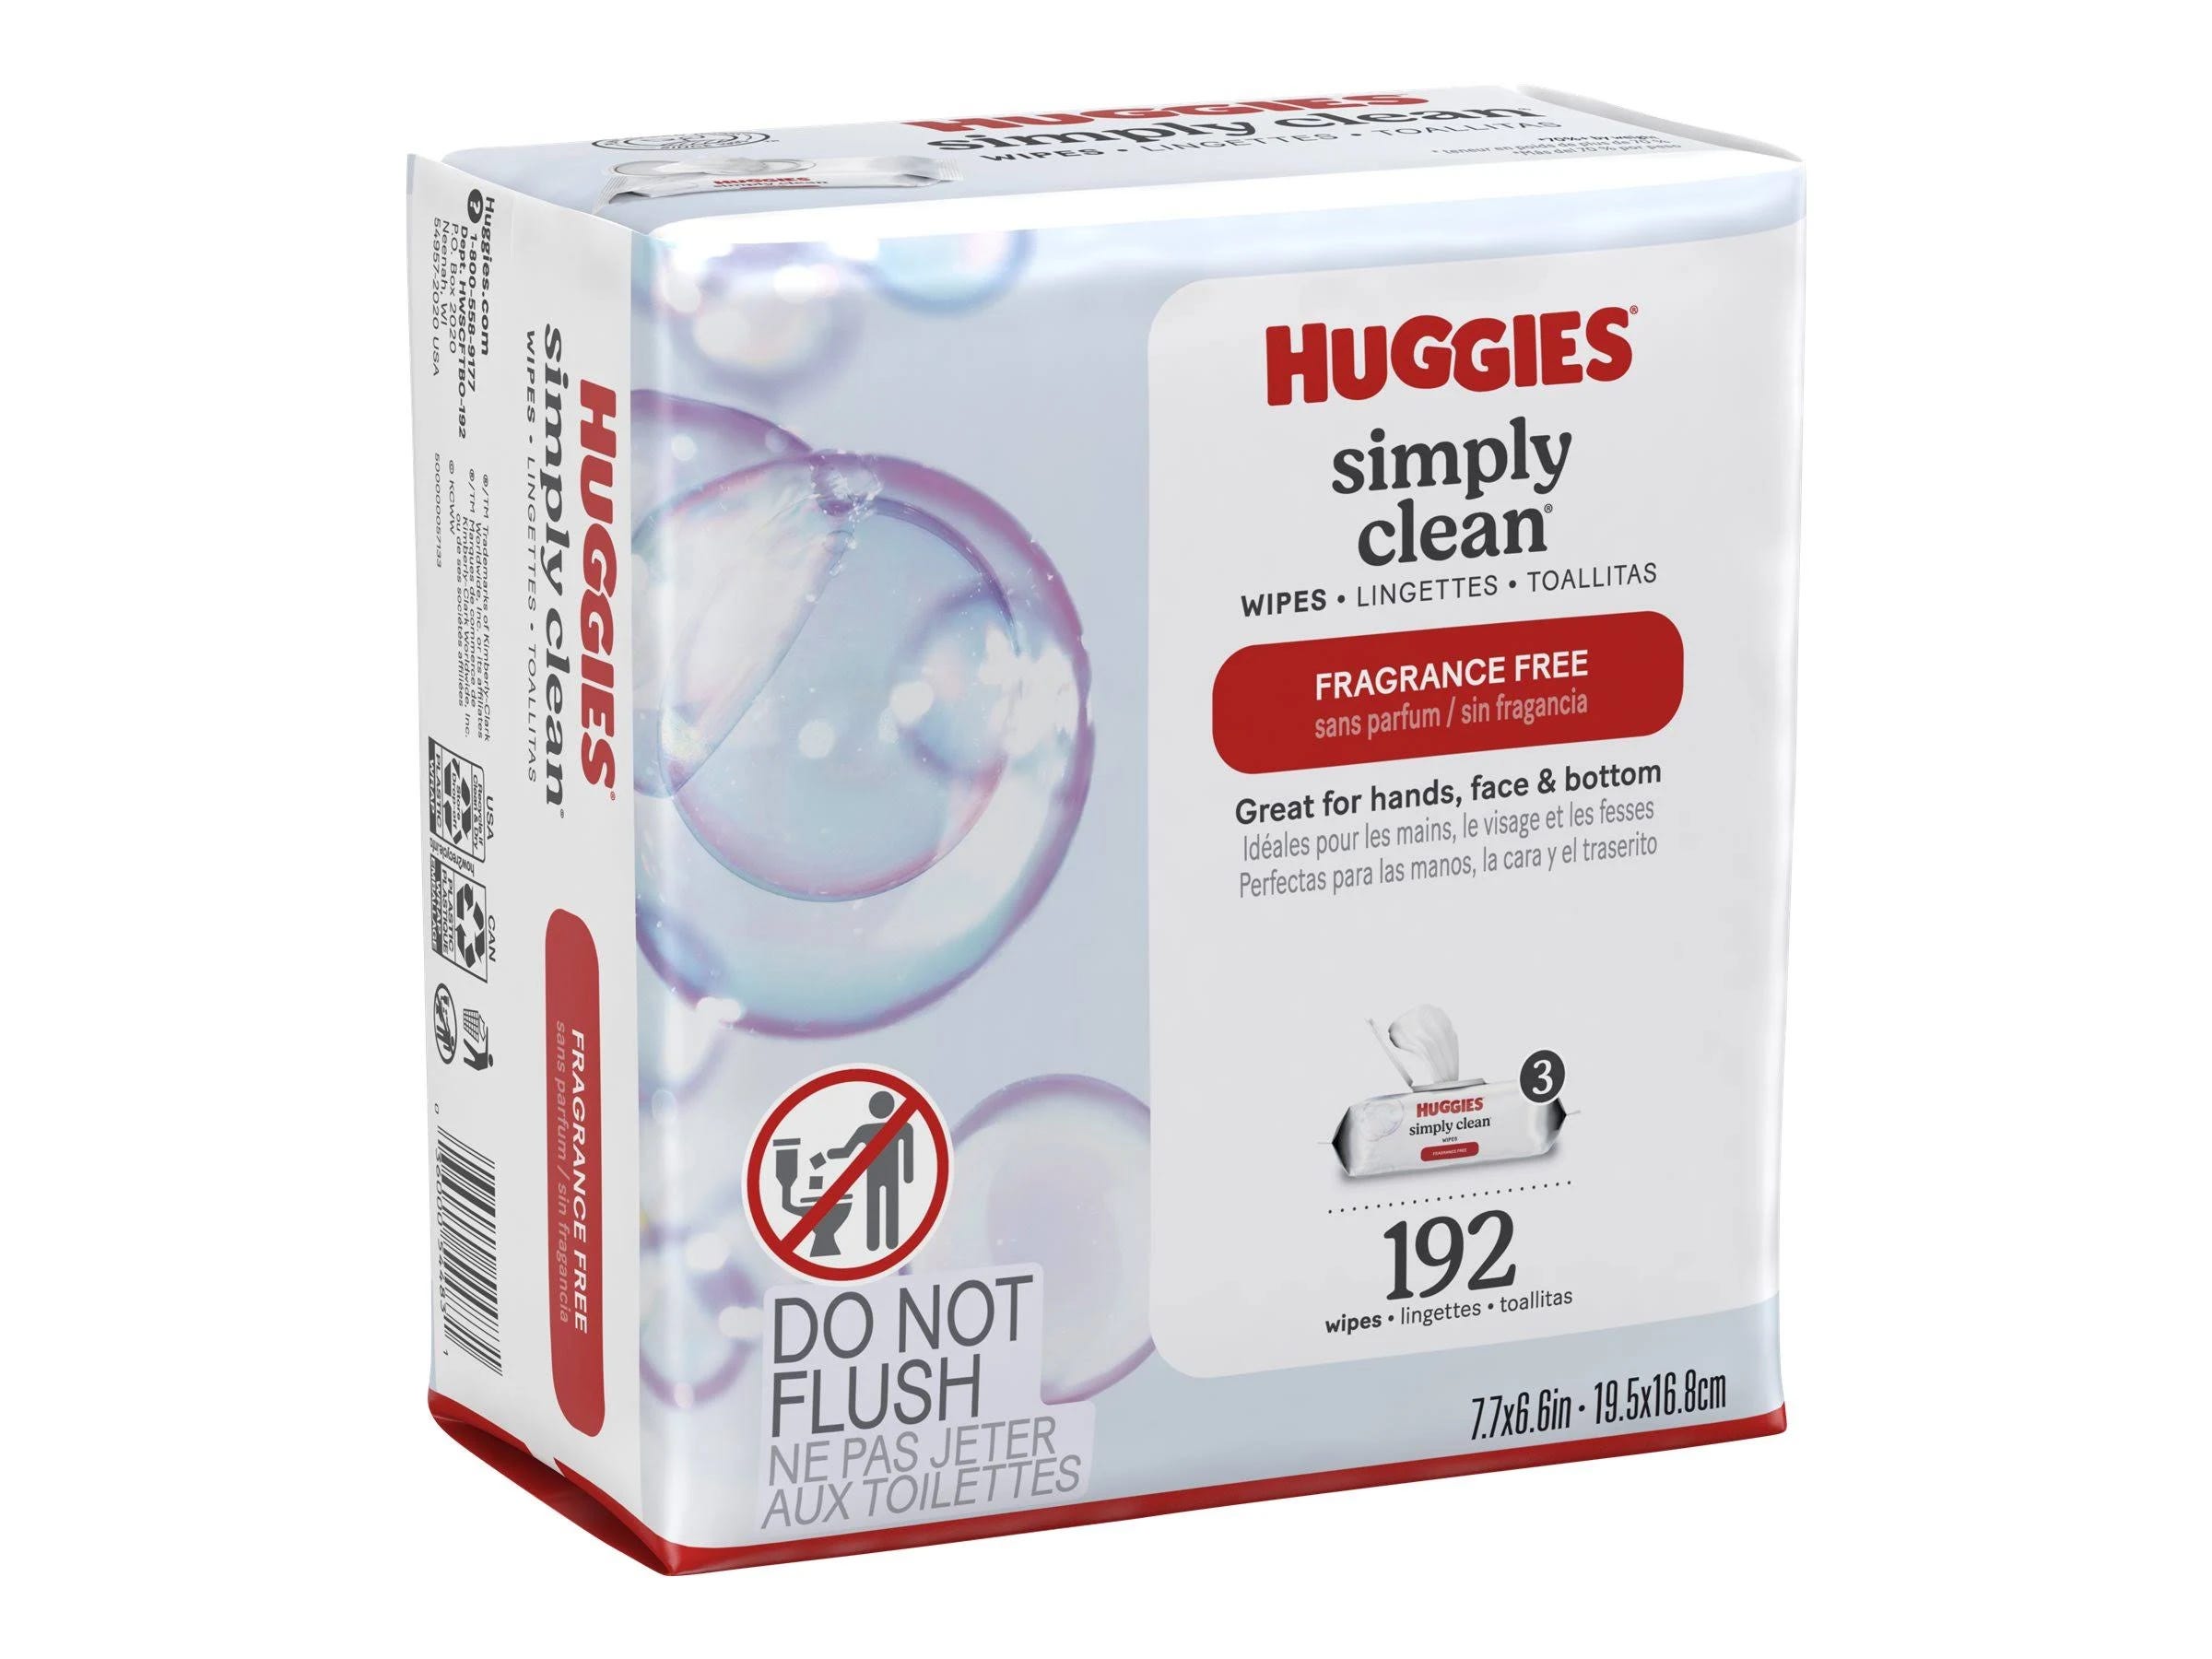 Huggies Simply Clean Unscented Wipes: Convenient, Plant-Based, and Hypoallergenic | Image